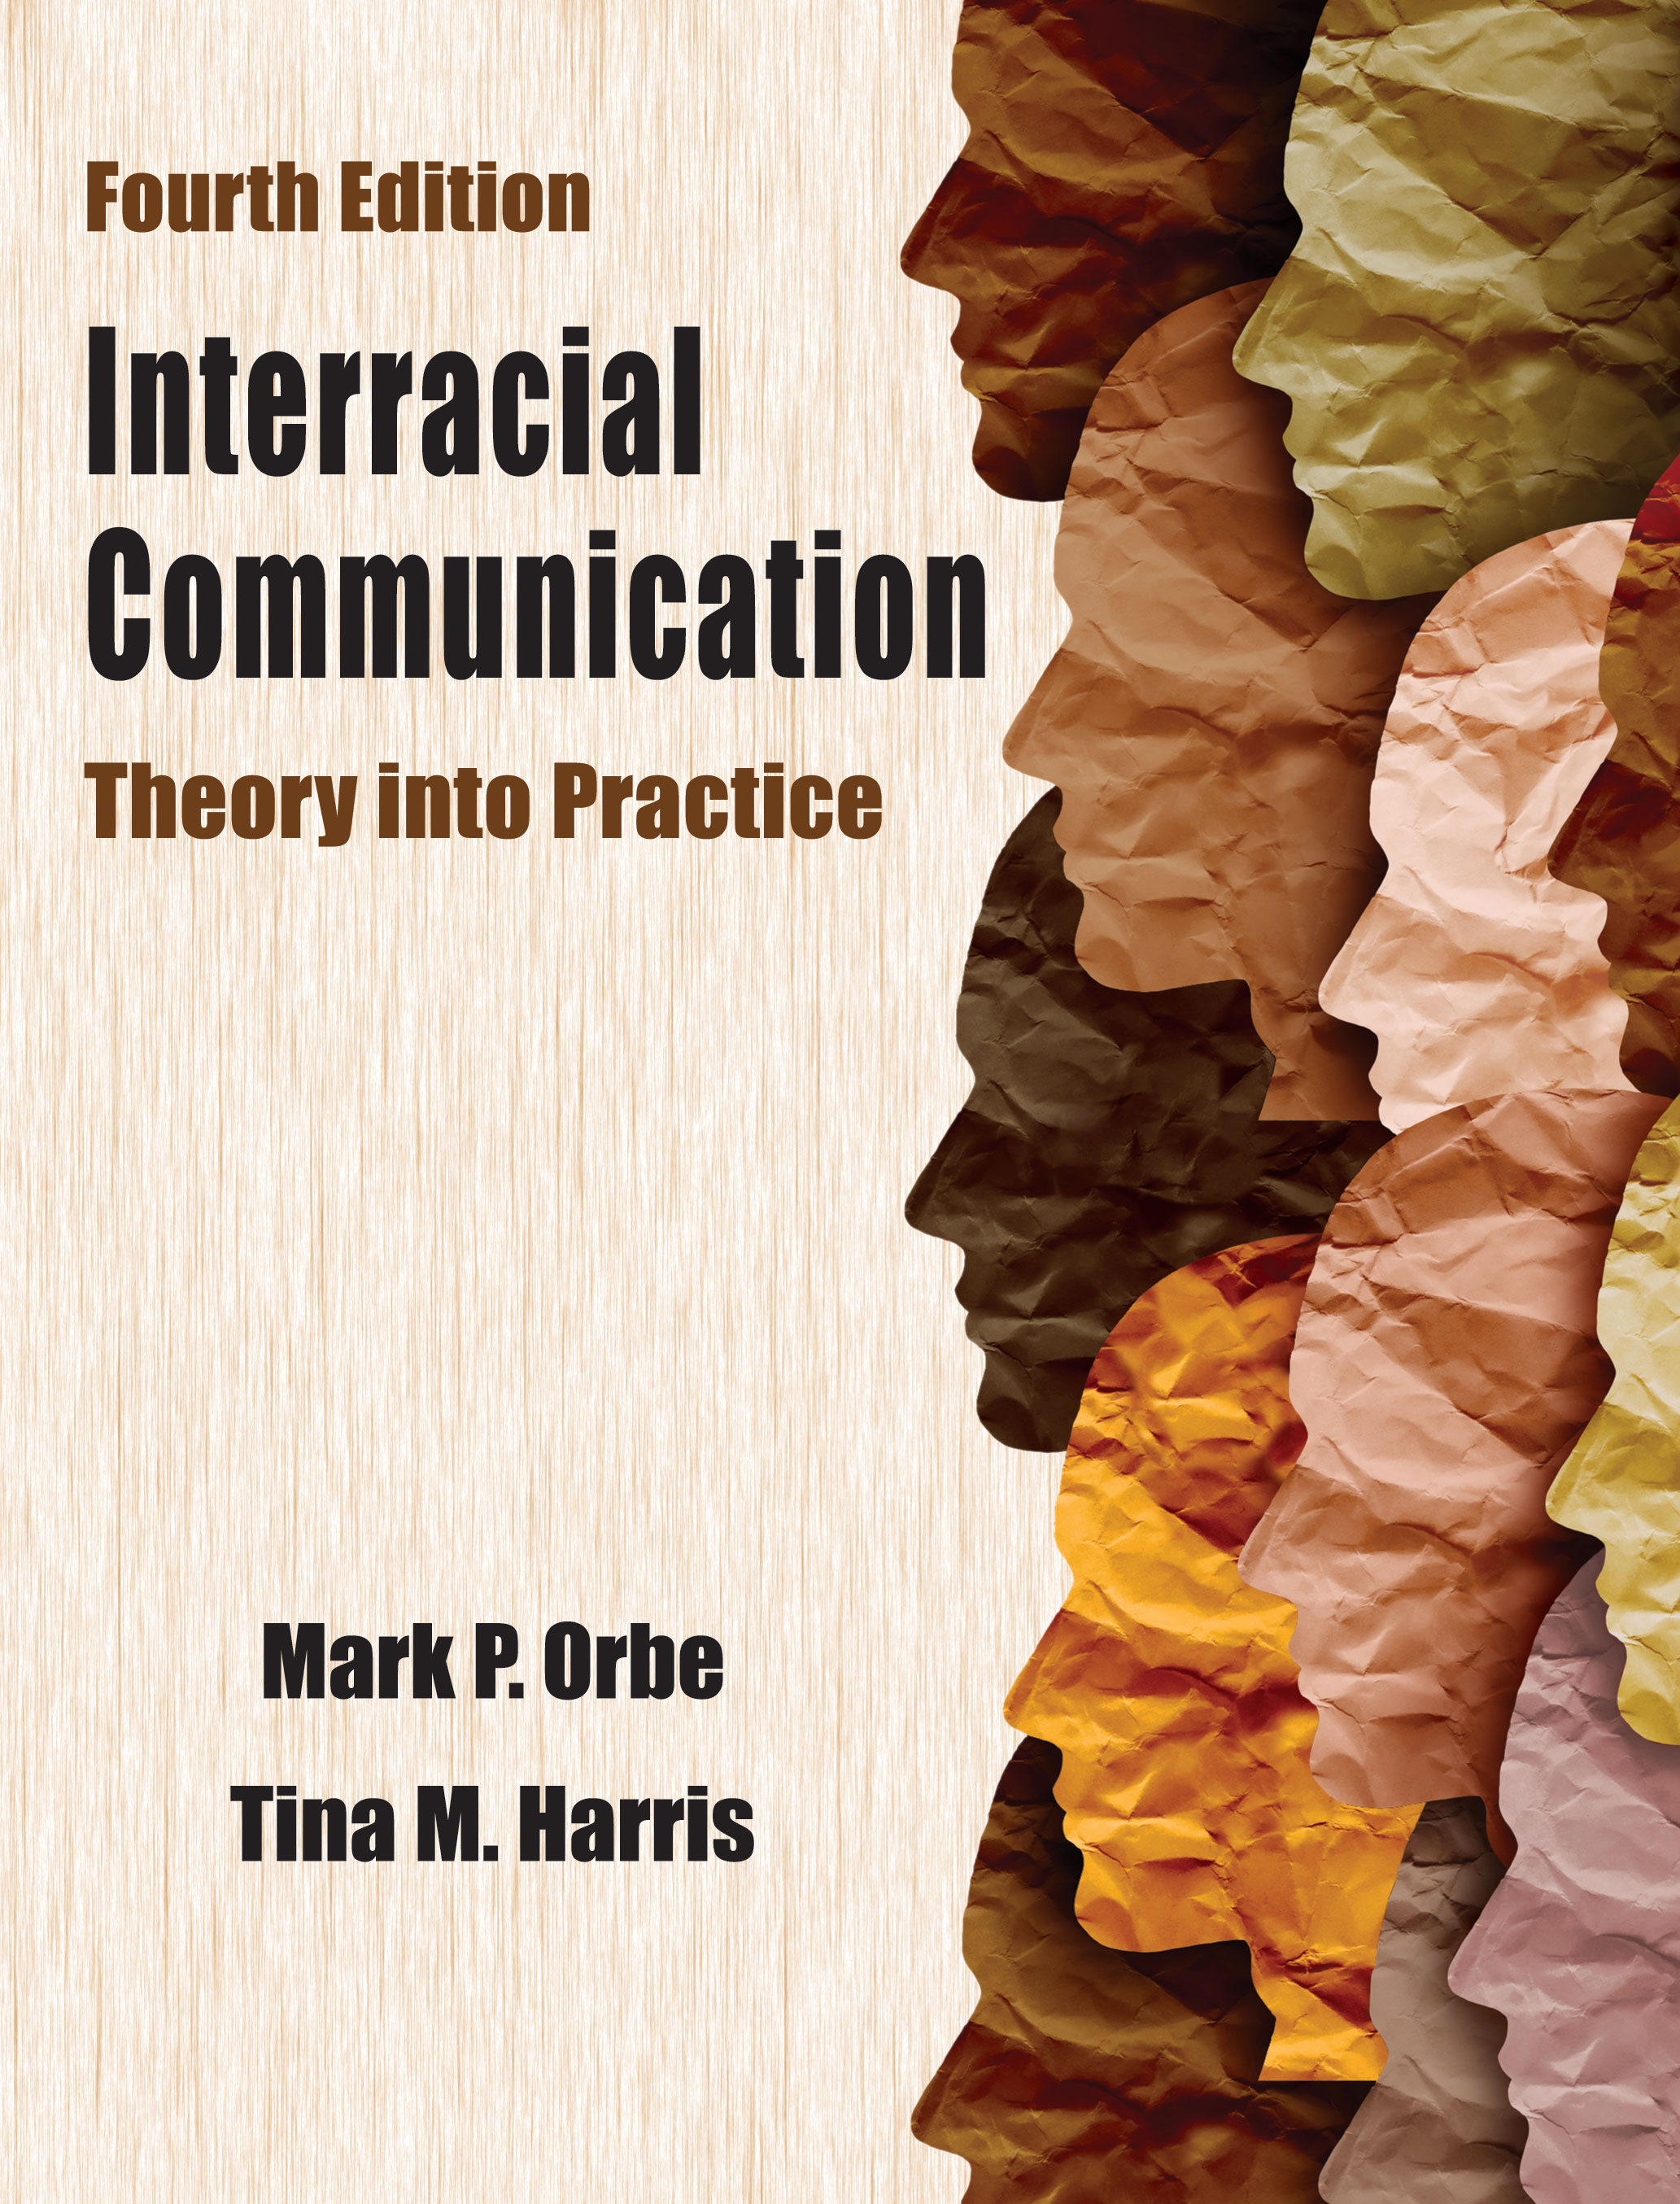 Interracial Communication: Theory into Practice by Mark P. Orbe, Tina M. Harris